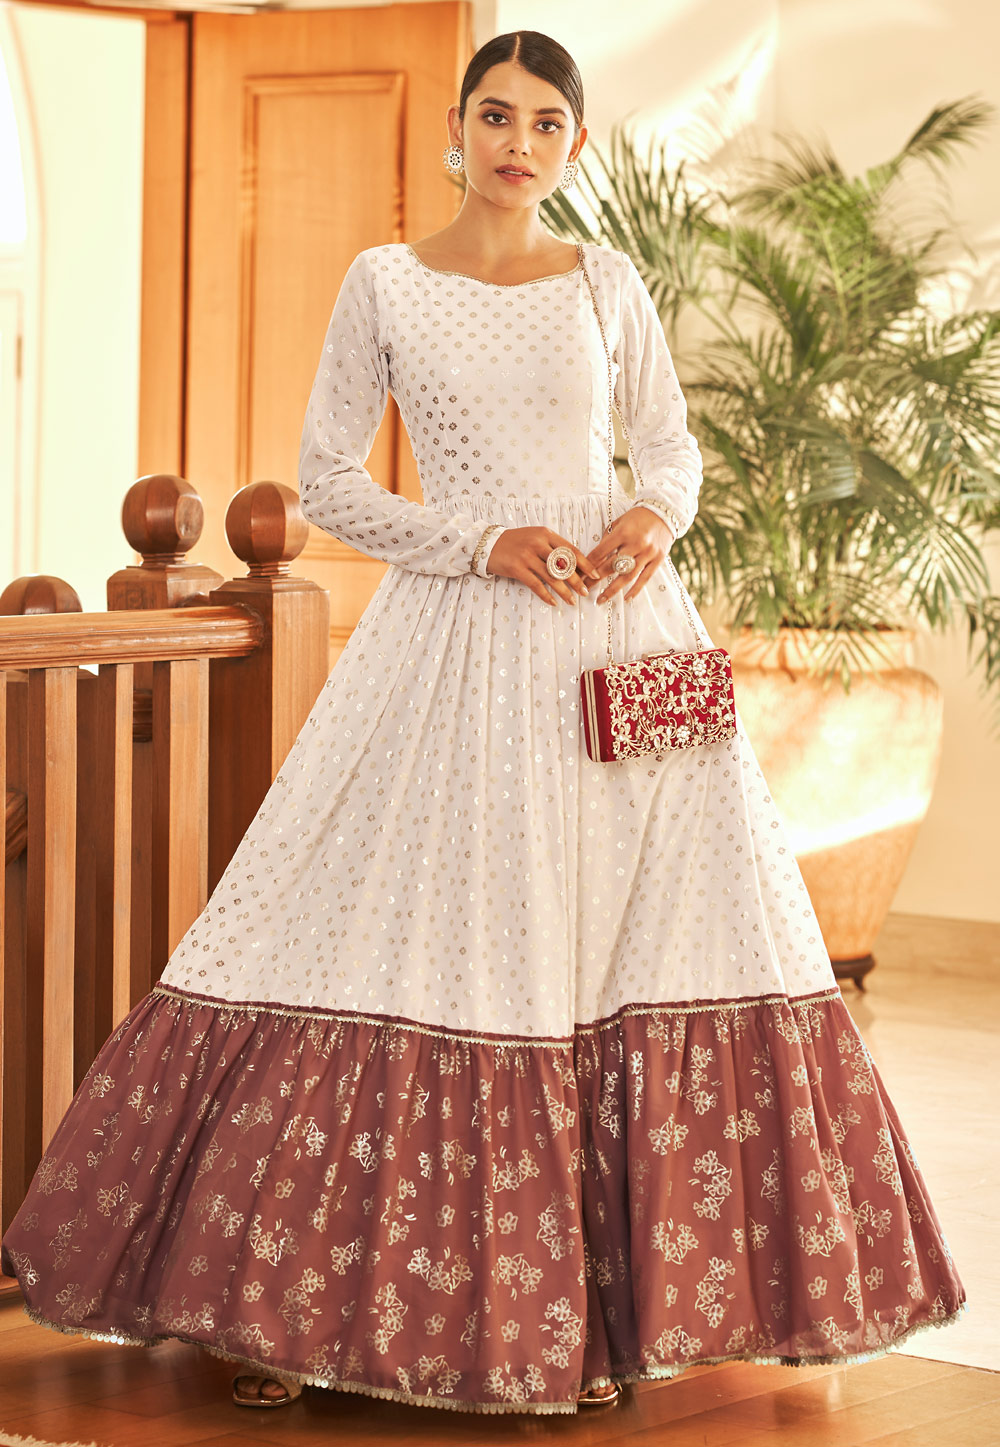 Buy Ethnic Wear Gowns for women's Online free Shipping | Haya Closet